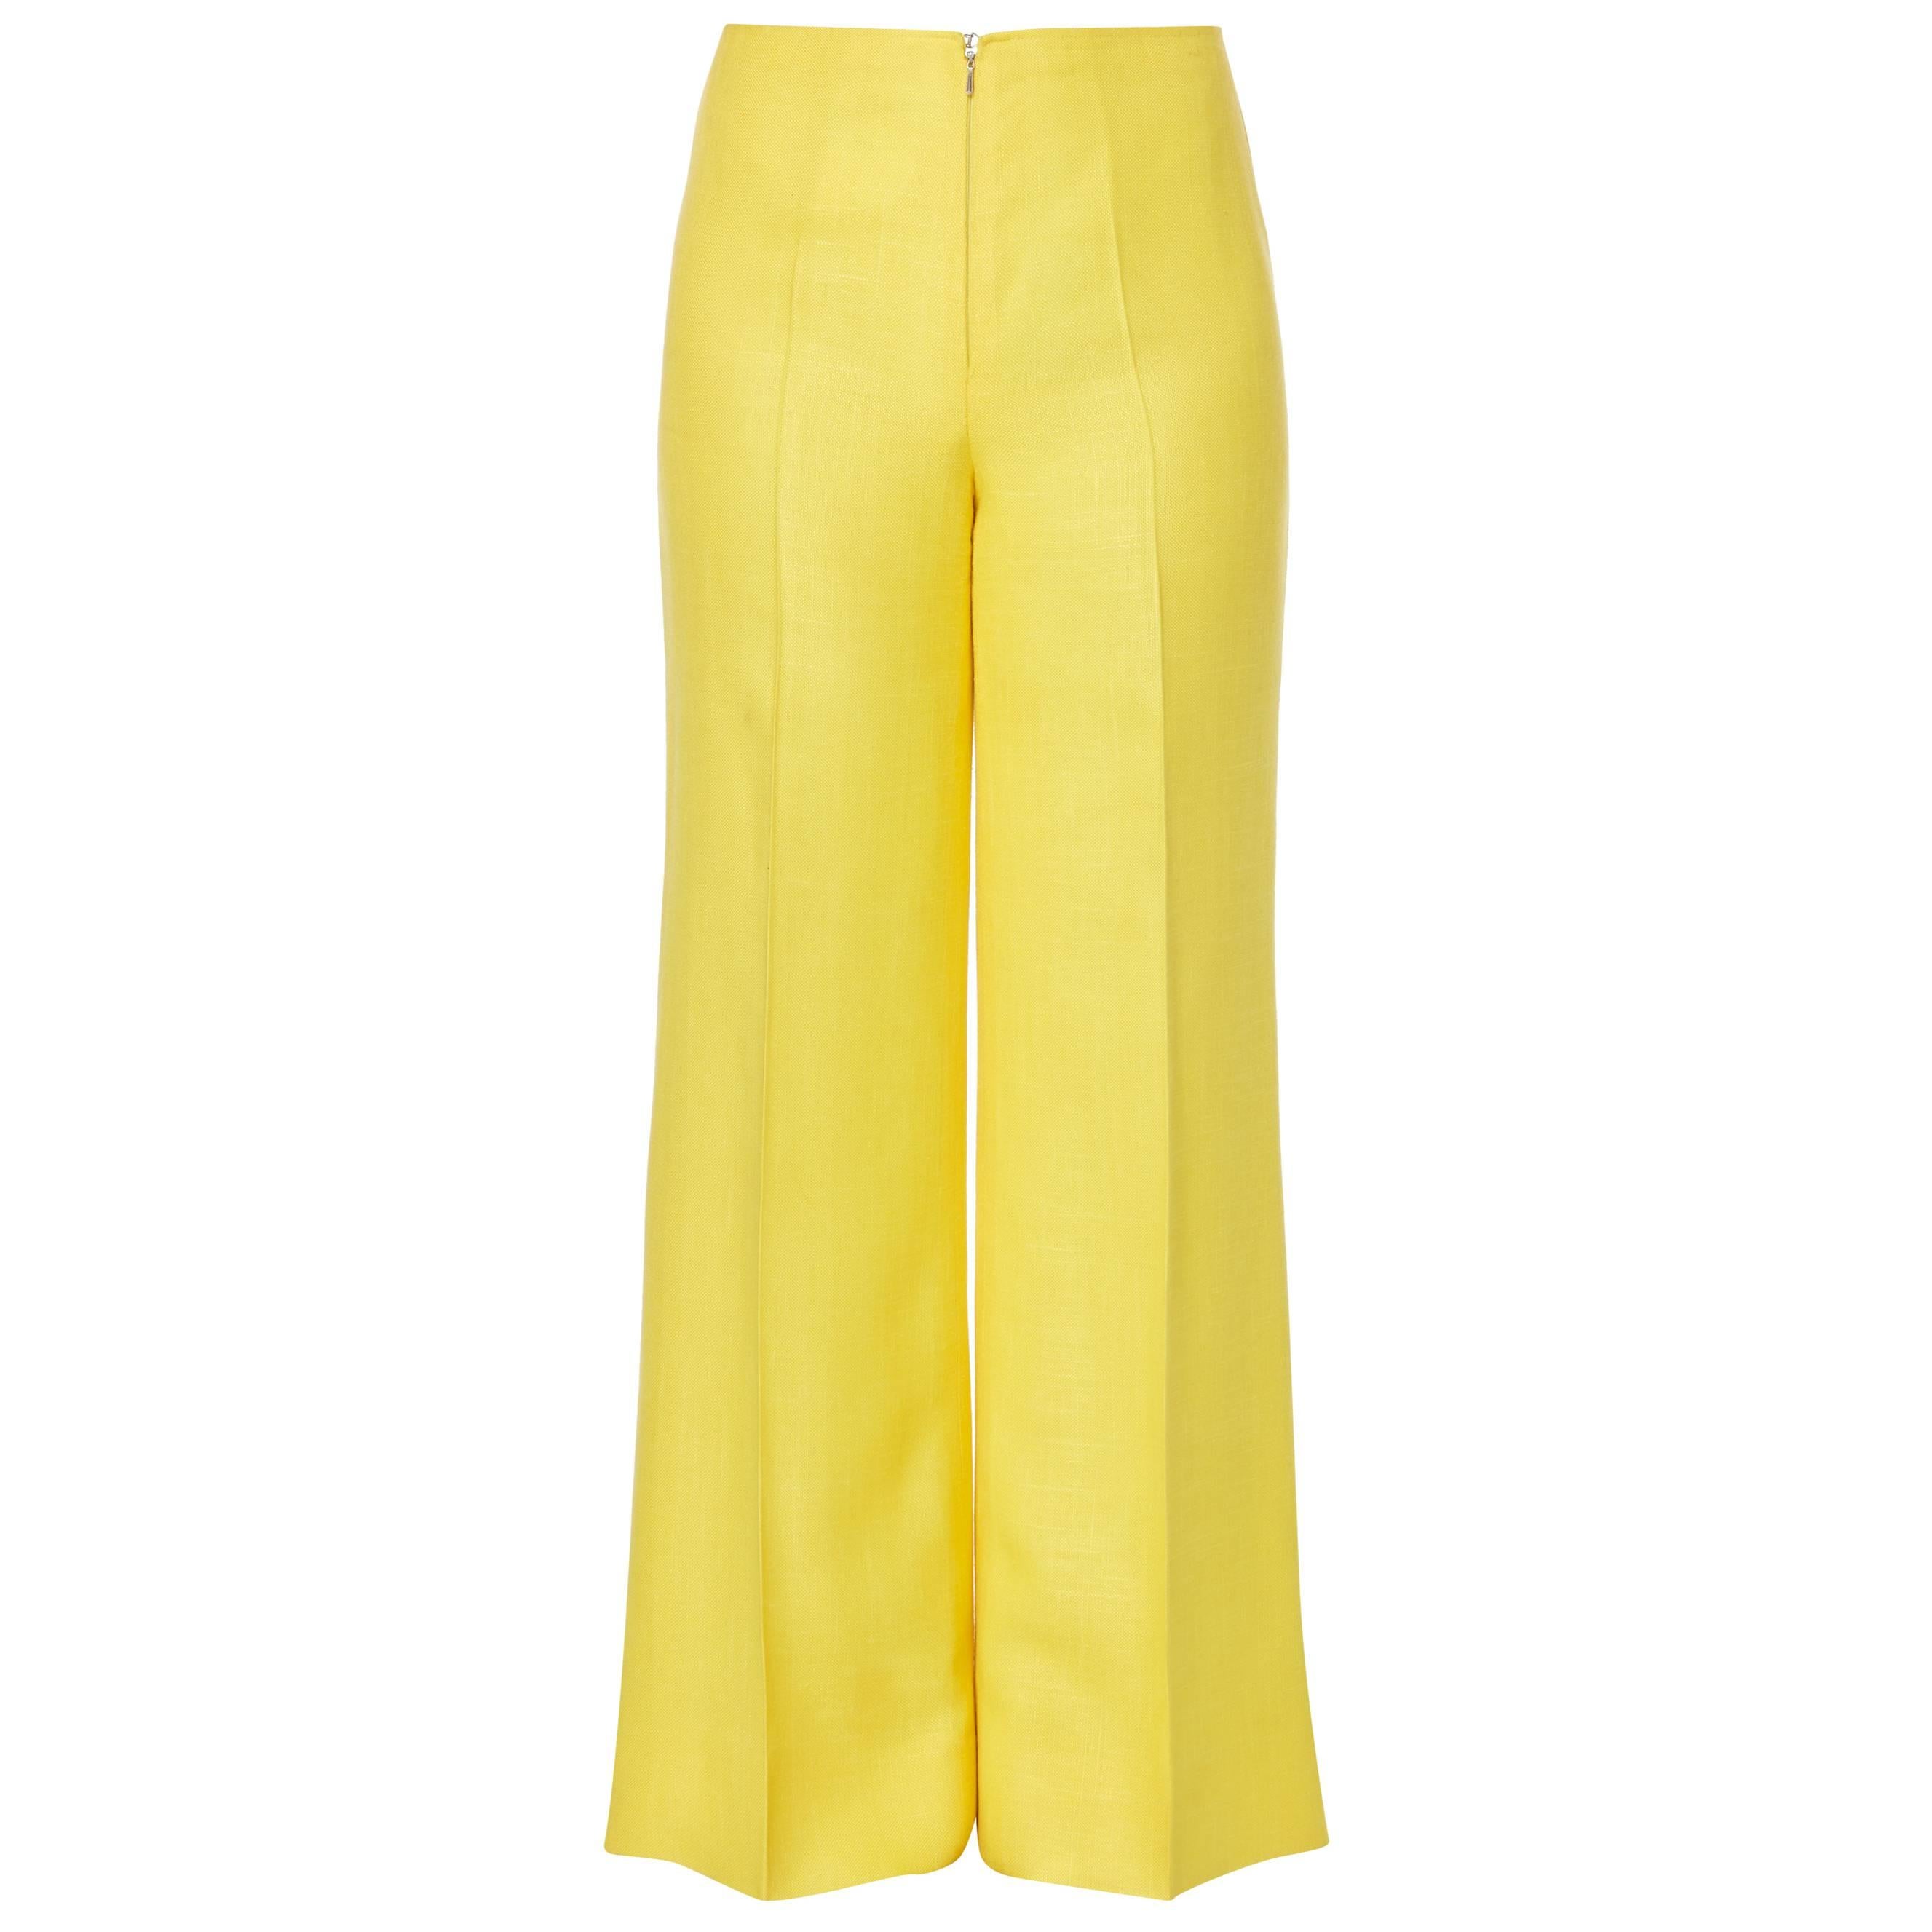 Courrèges yellow trousers, circa 1970